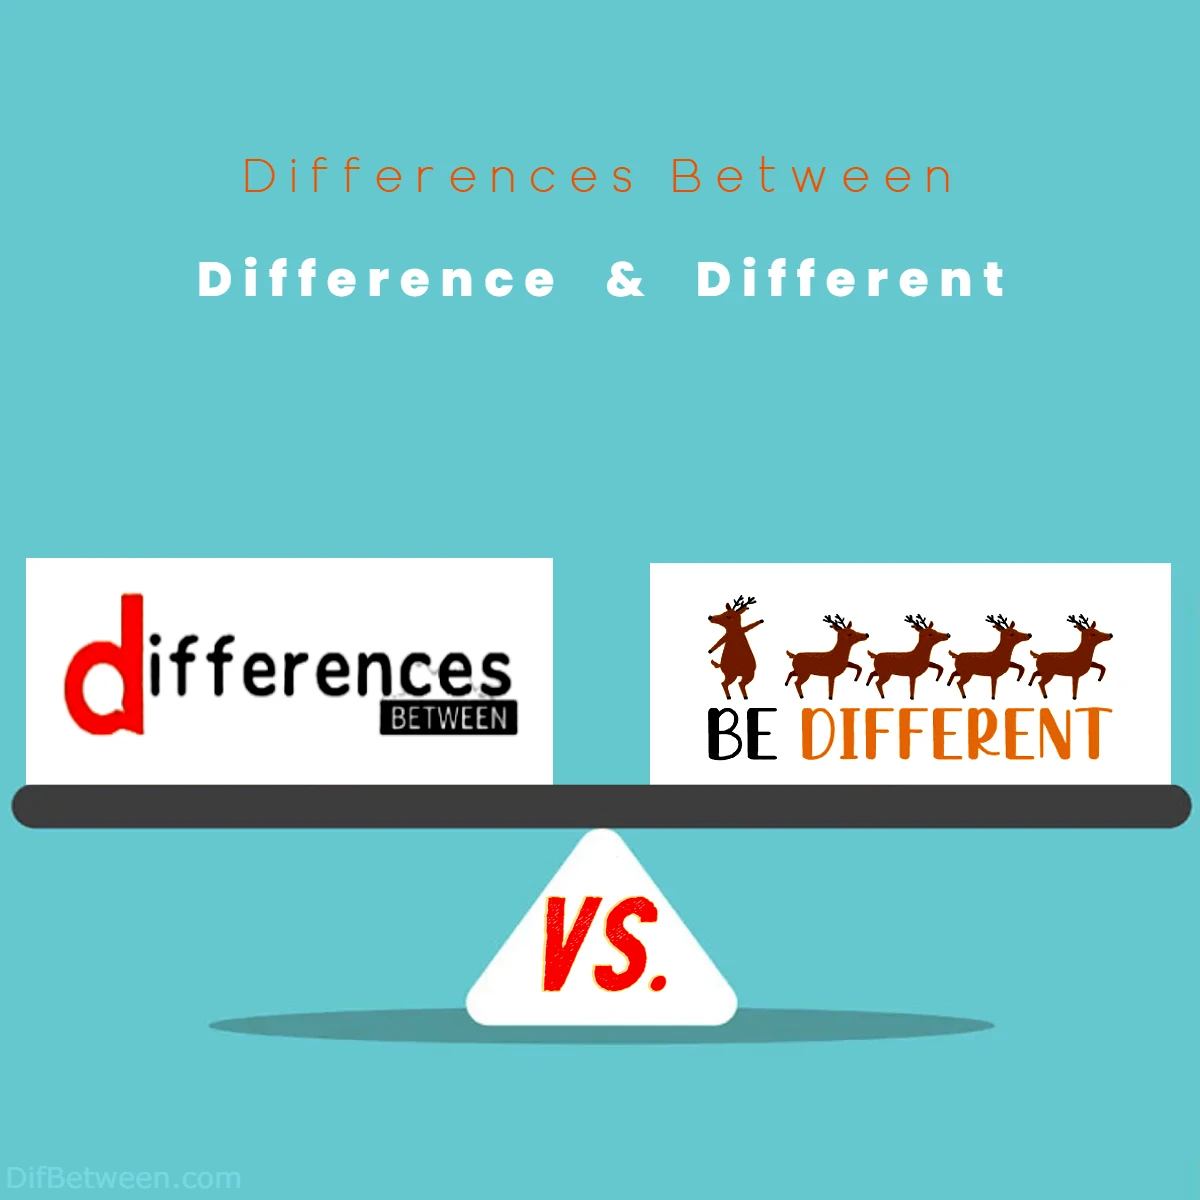 Differences Between Difference vs Different